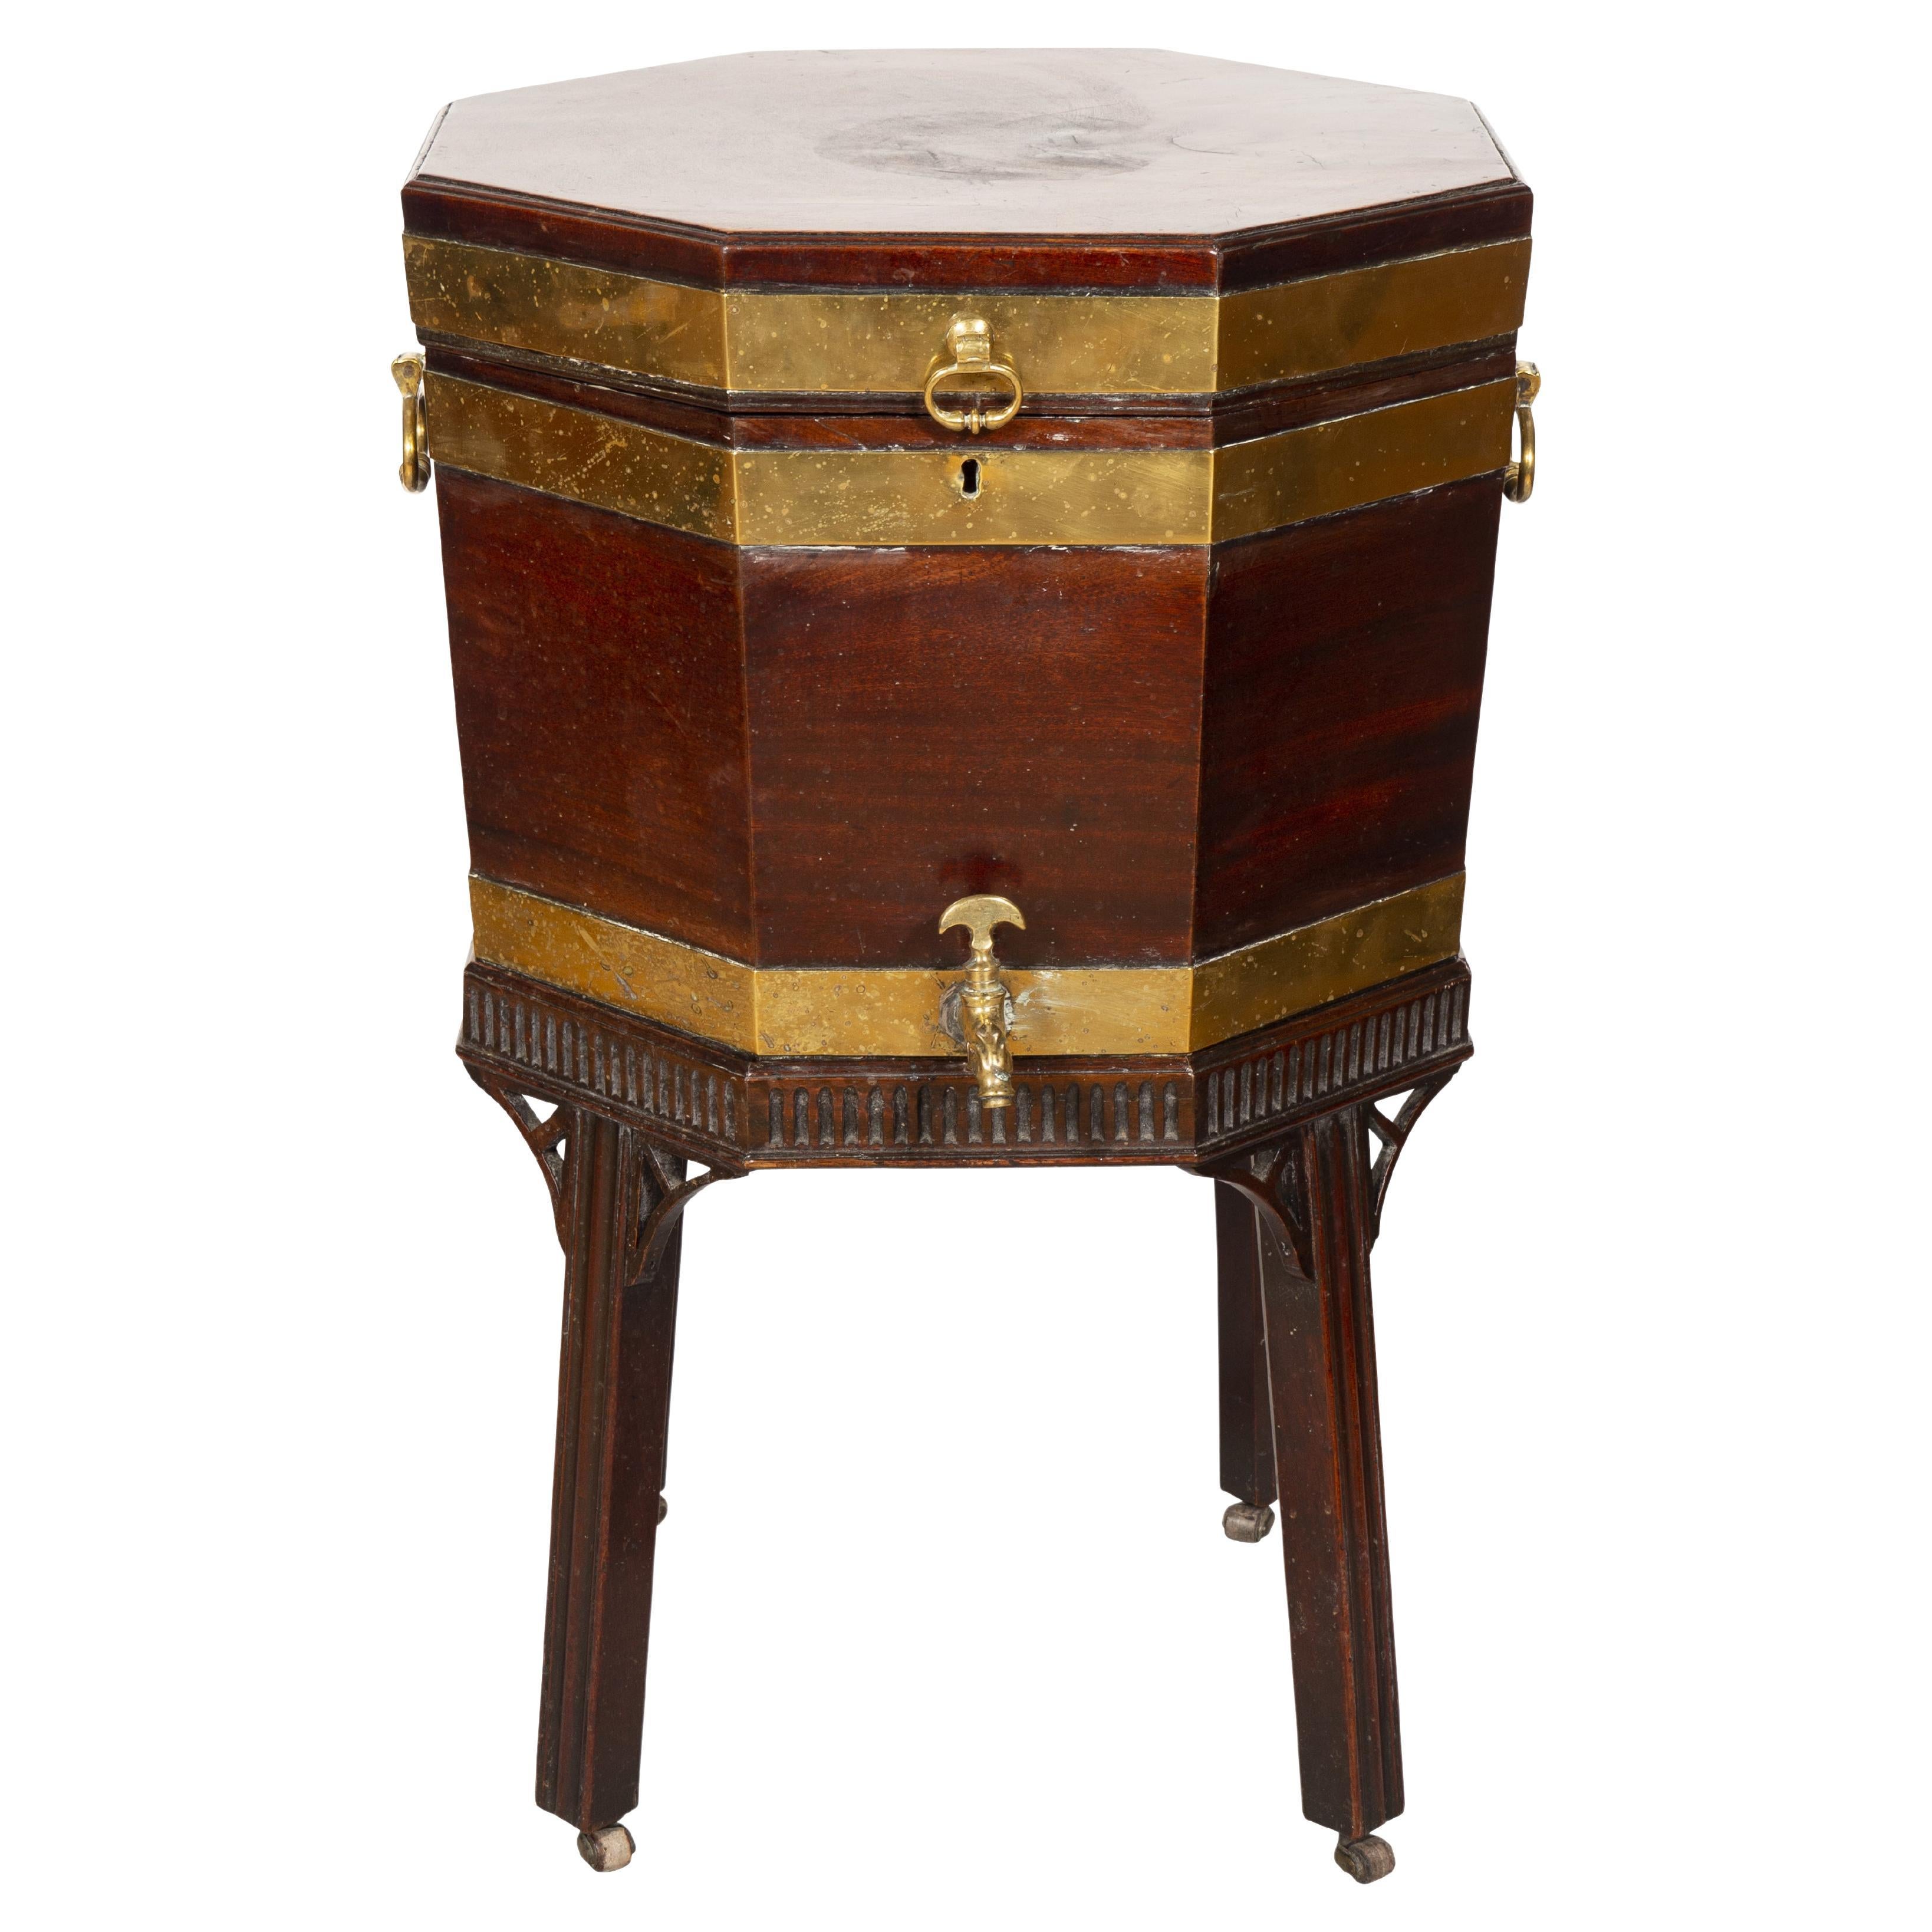 Octagonal hinged top opening to a lead lined compartment , conforming brass strapped case with spigot , base with fluted carved frieze and square molded legs and casters.